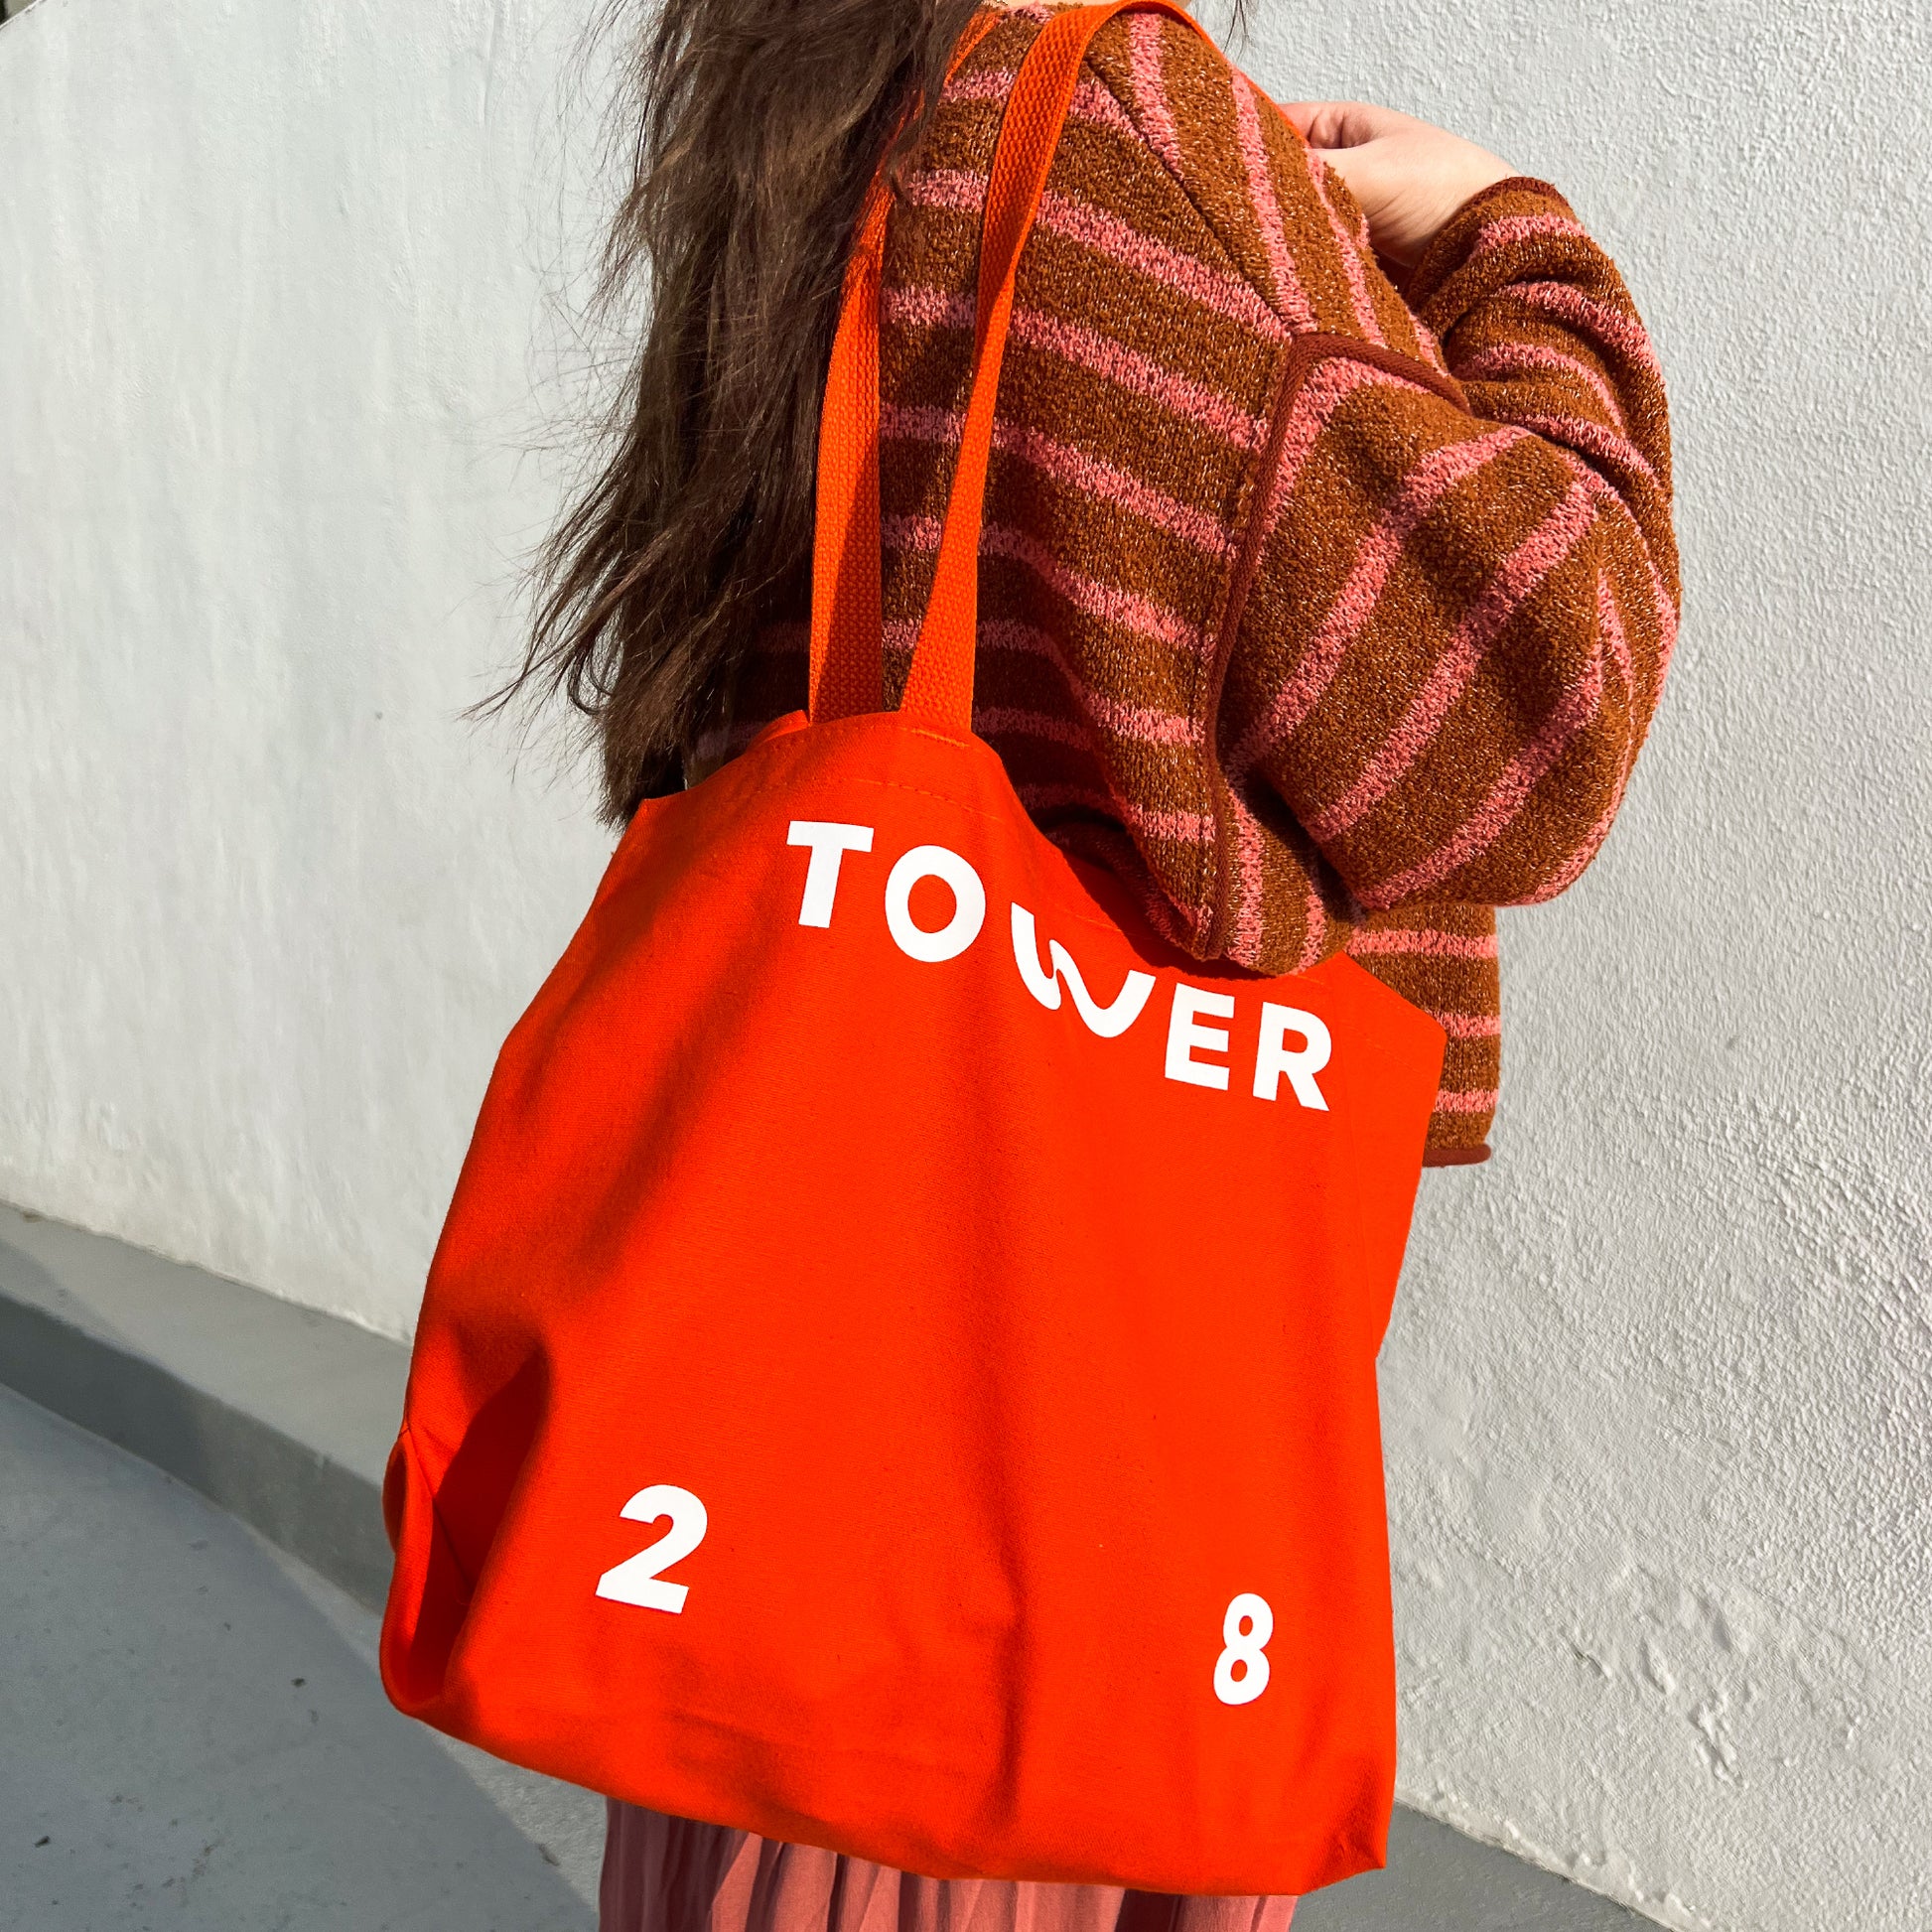 [Shared: The Tower 28 Beauty tote bag being carried on figure